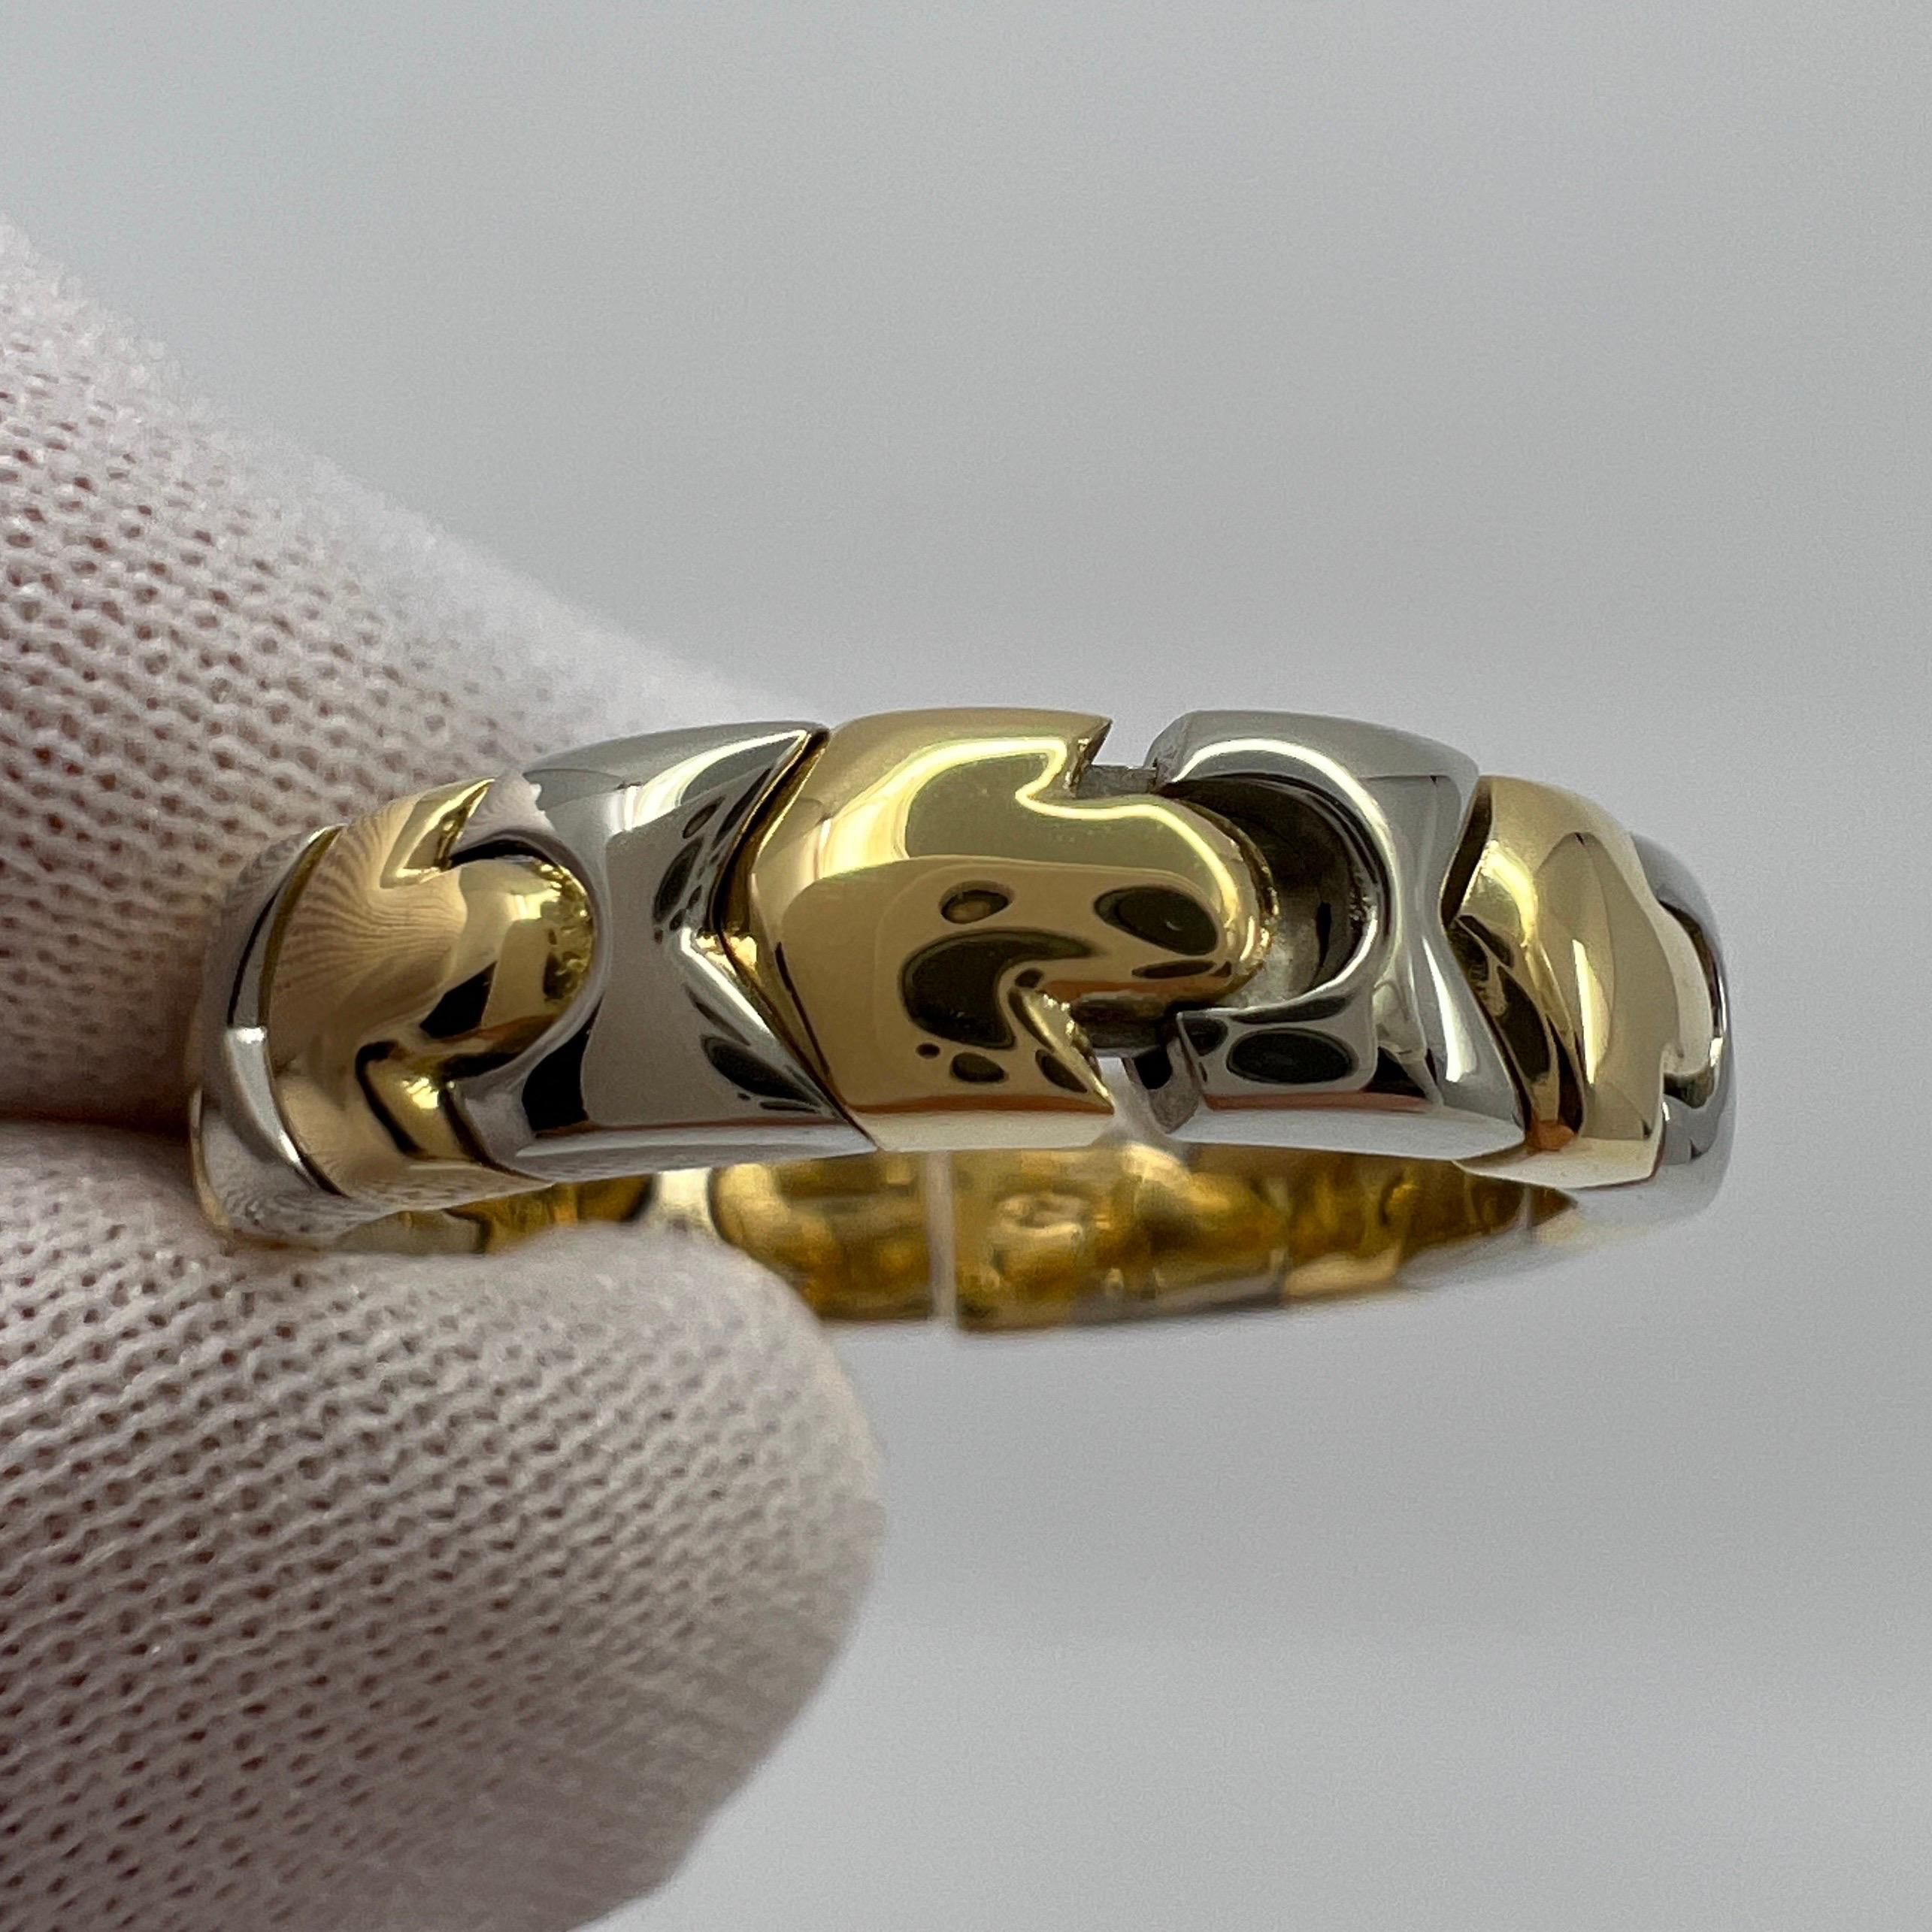 Very Rare Vintage Bvlgari Alveare 18 Karat Yellow And White Gold Spring Thin Band Ring.

A beautiful and rare vintage 18k yellow & white gold Bvlgari Alveare ring with flexible spring design.
This stylish and unique spring design allows it to fit